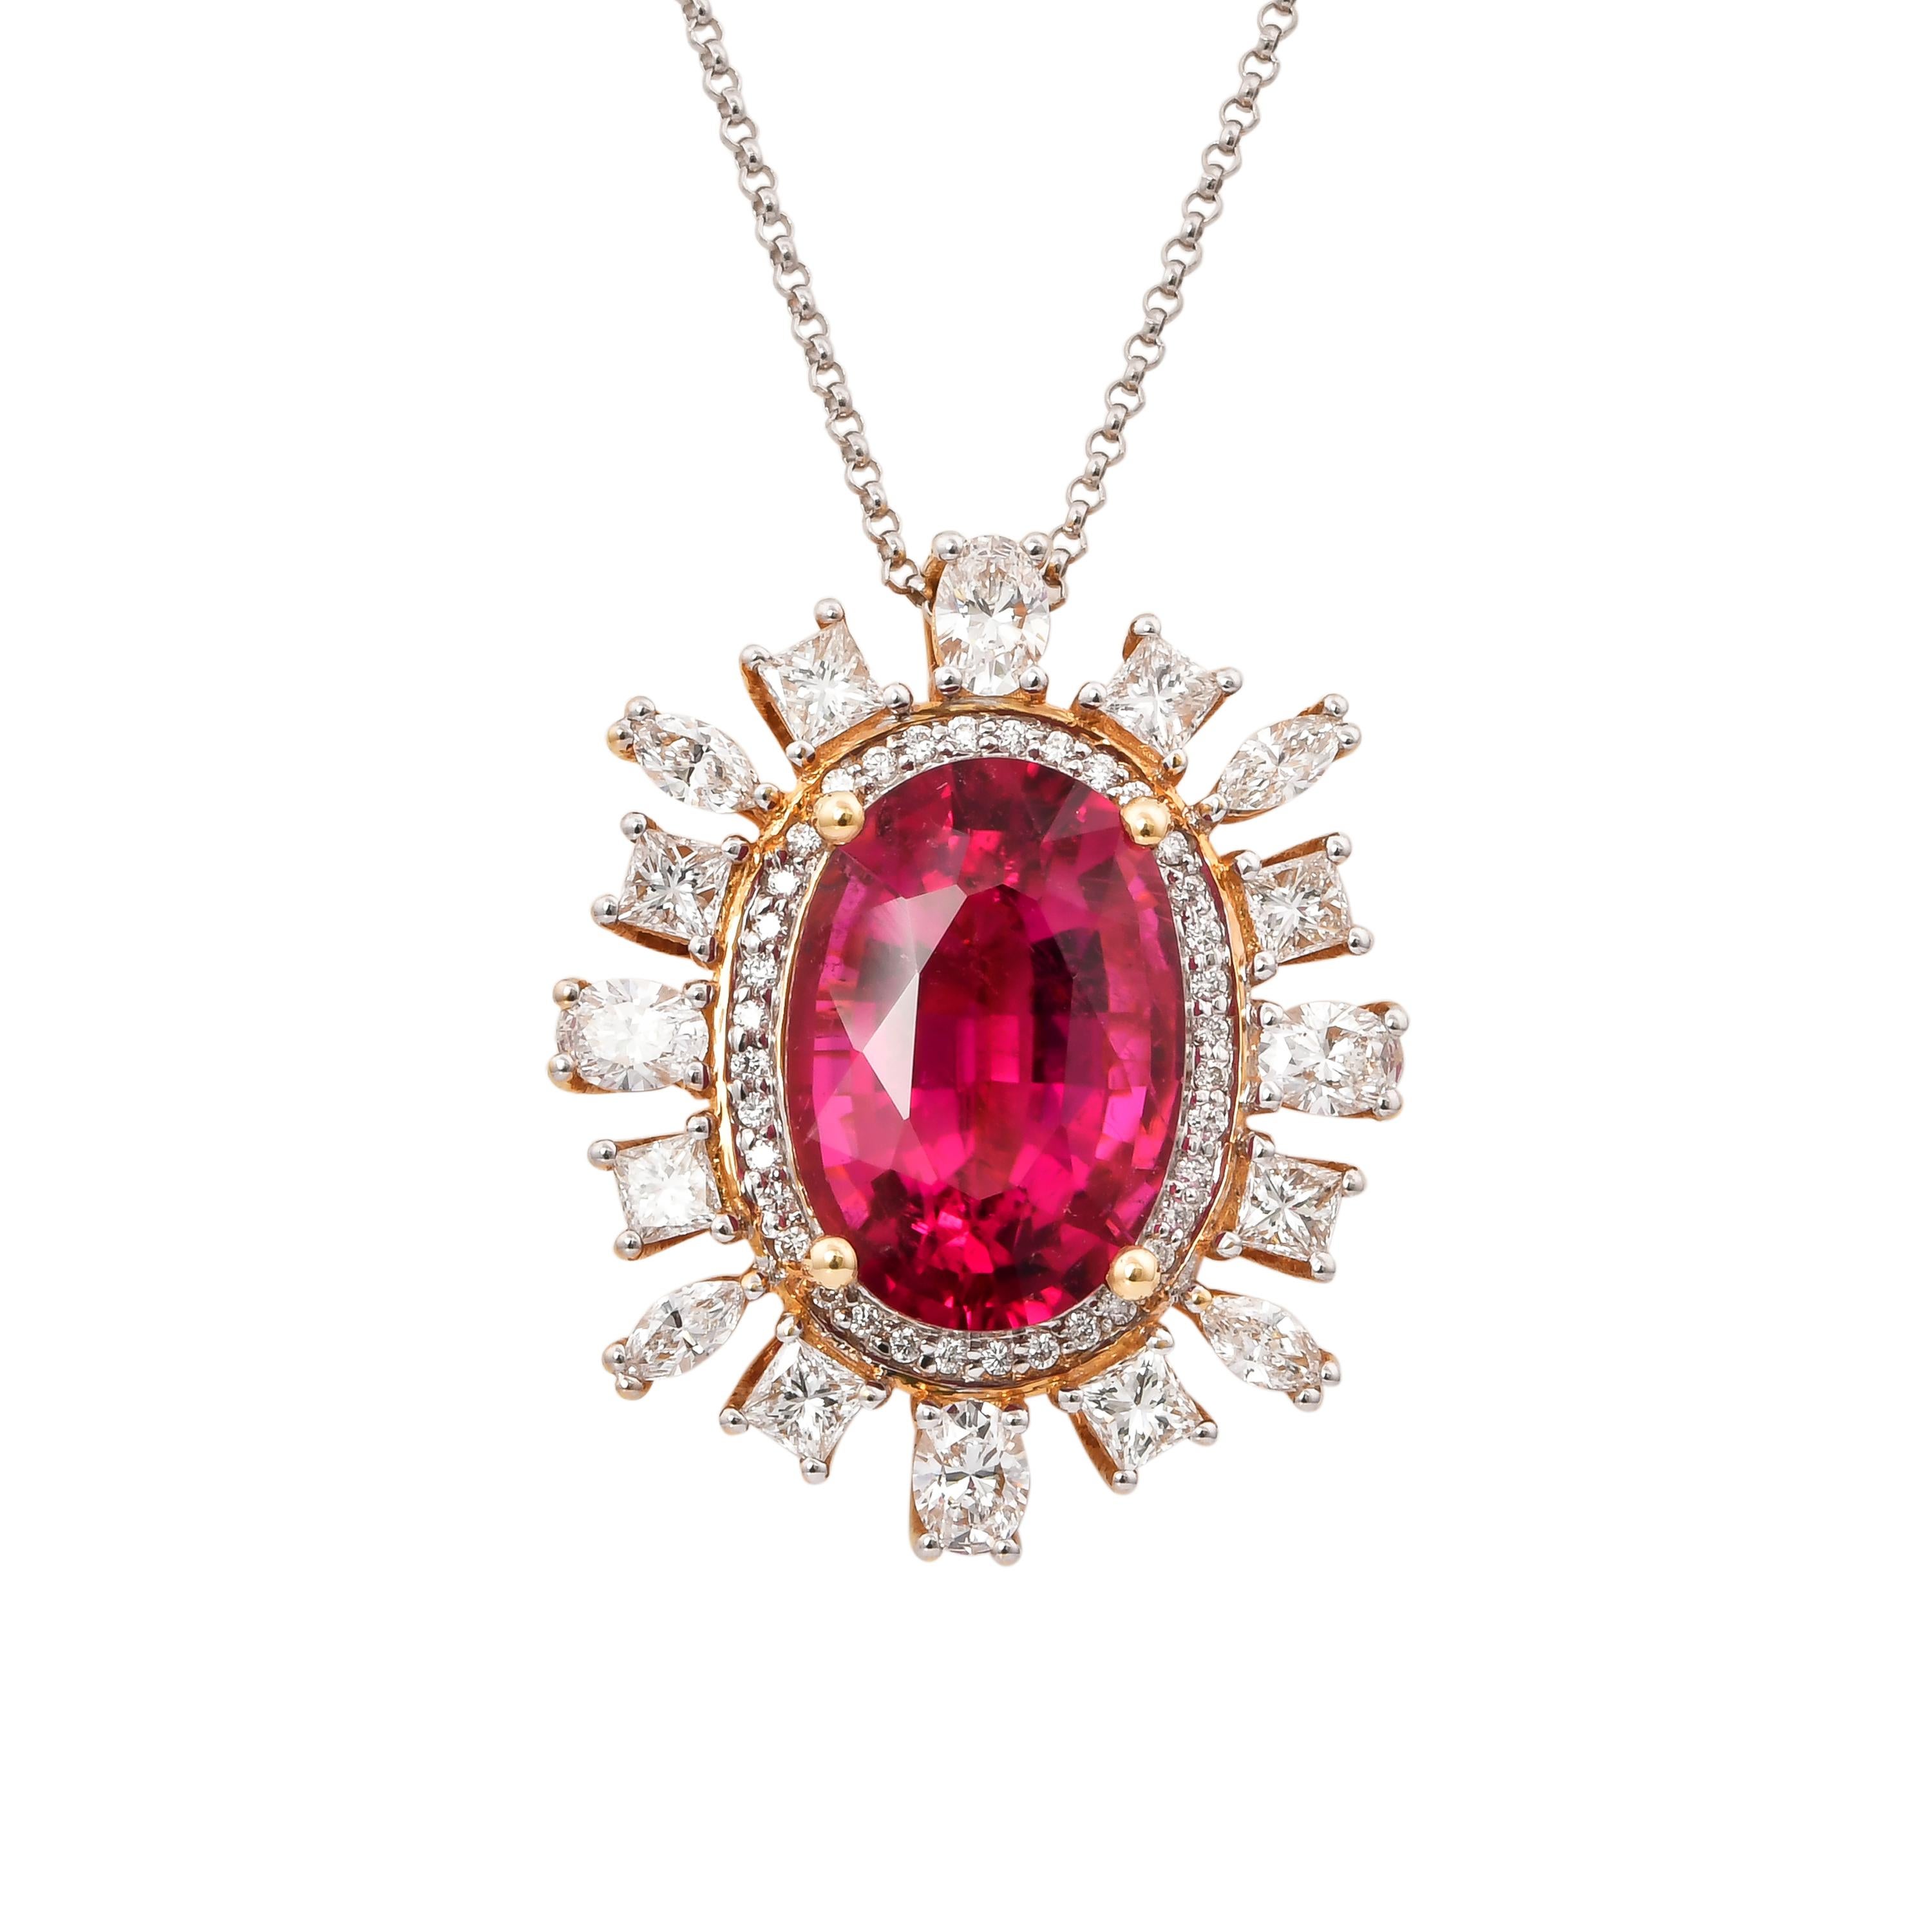 7.6 Carat Rubelite Tourmaline Pendant with Diamond in 18 Karat Yellow Gold In New Condition For Sale In Hong Kong, HK